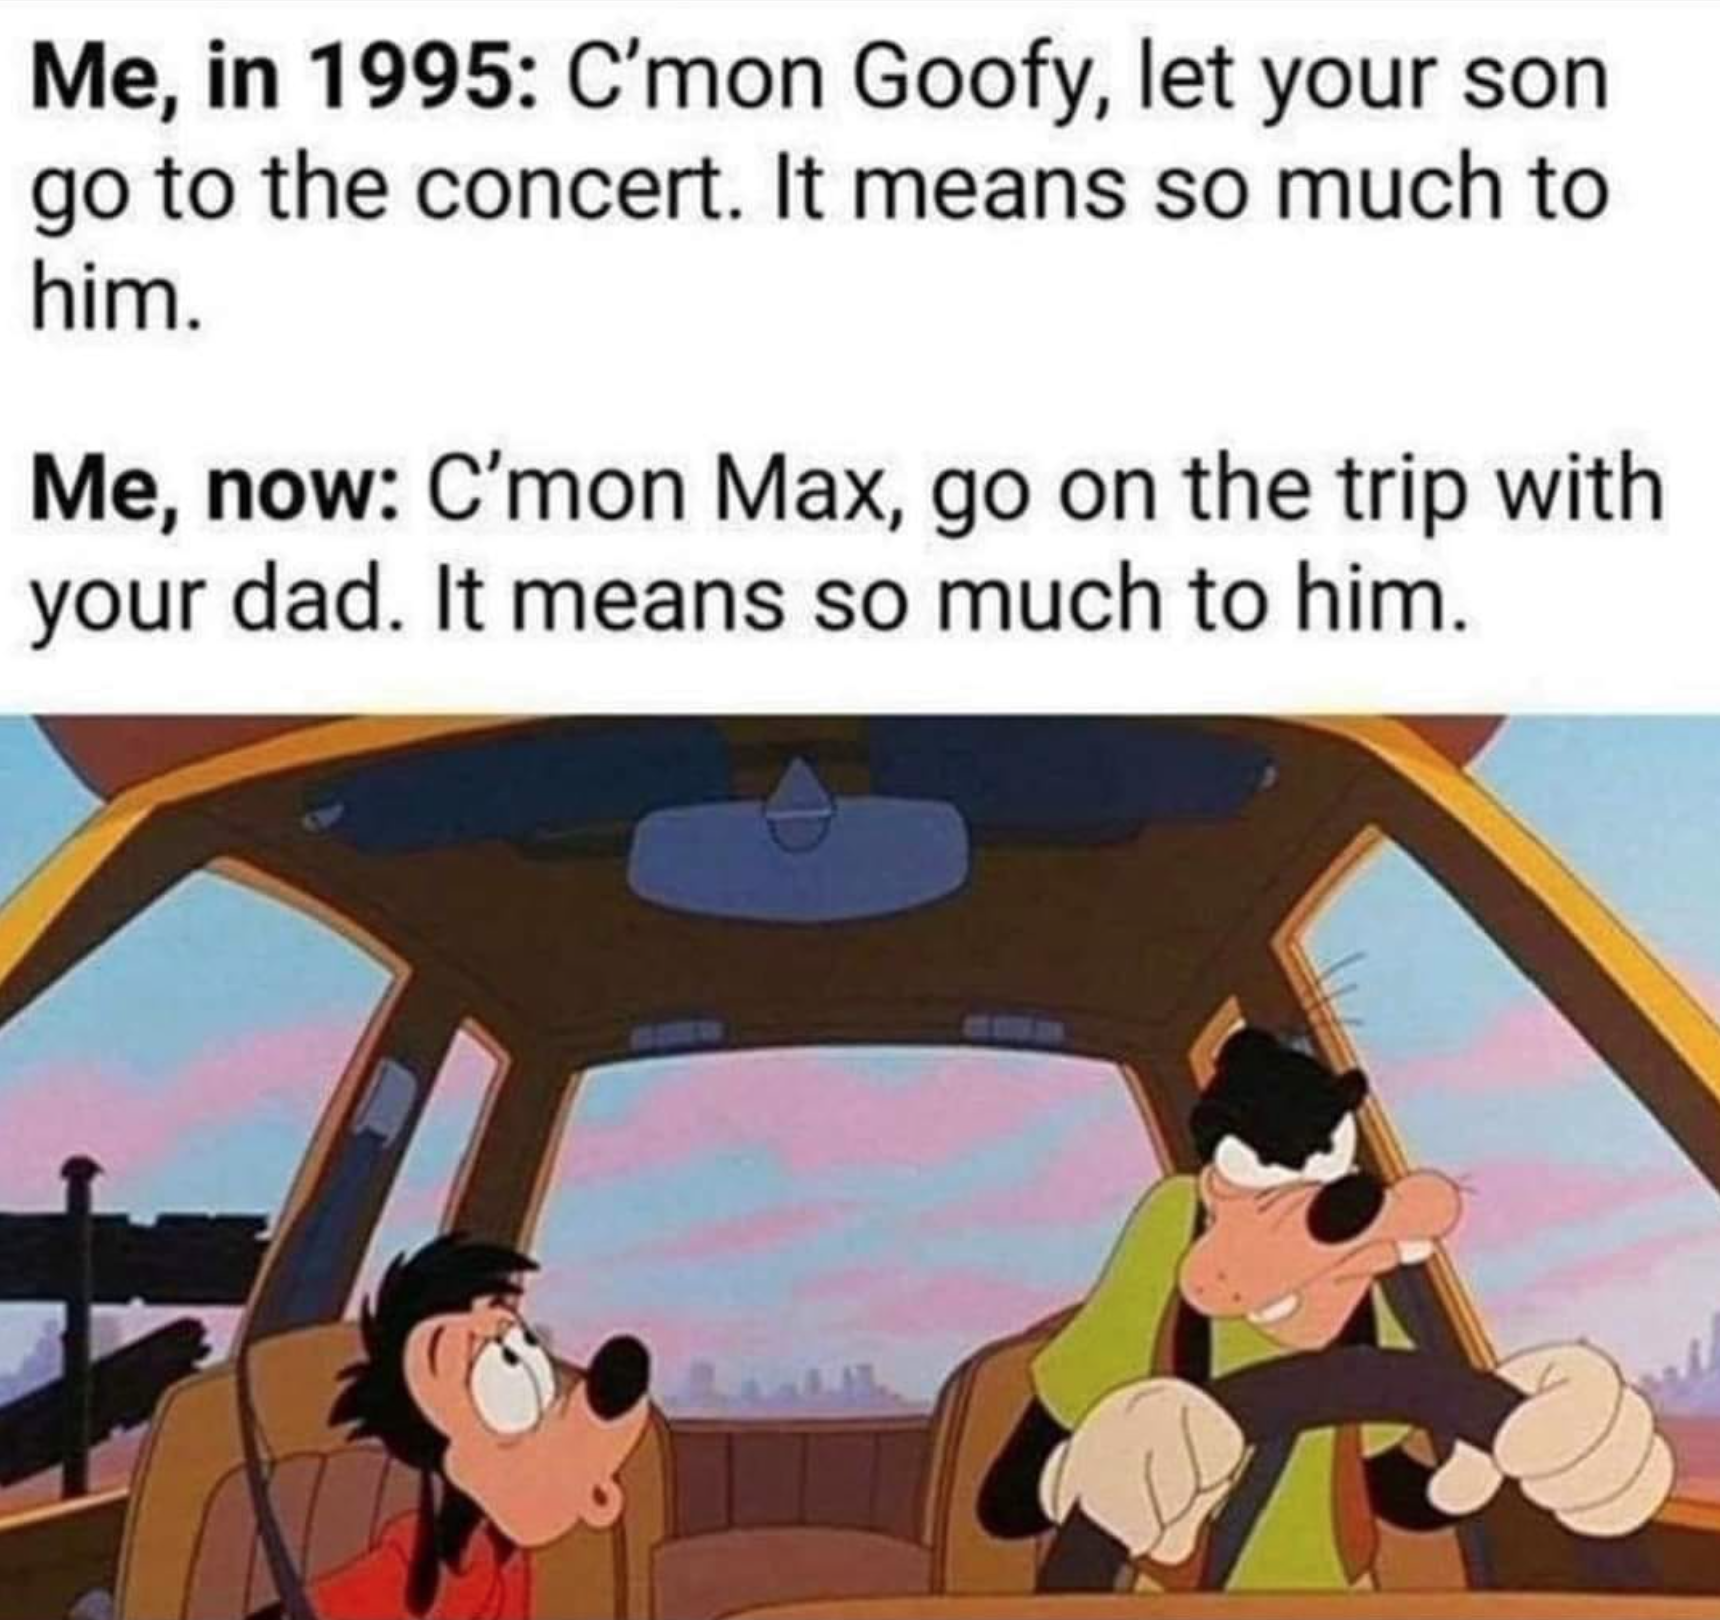 goofy movie angry goofy - Me, in 1995 C'mon Goofy, let your son go to the concert. It means so much to him. Me, now C'mon Max, go on the trip with your dad. It means so much to him.